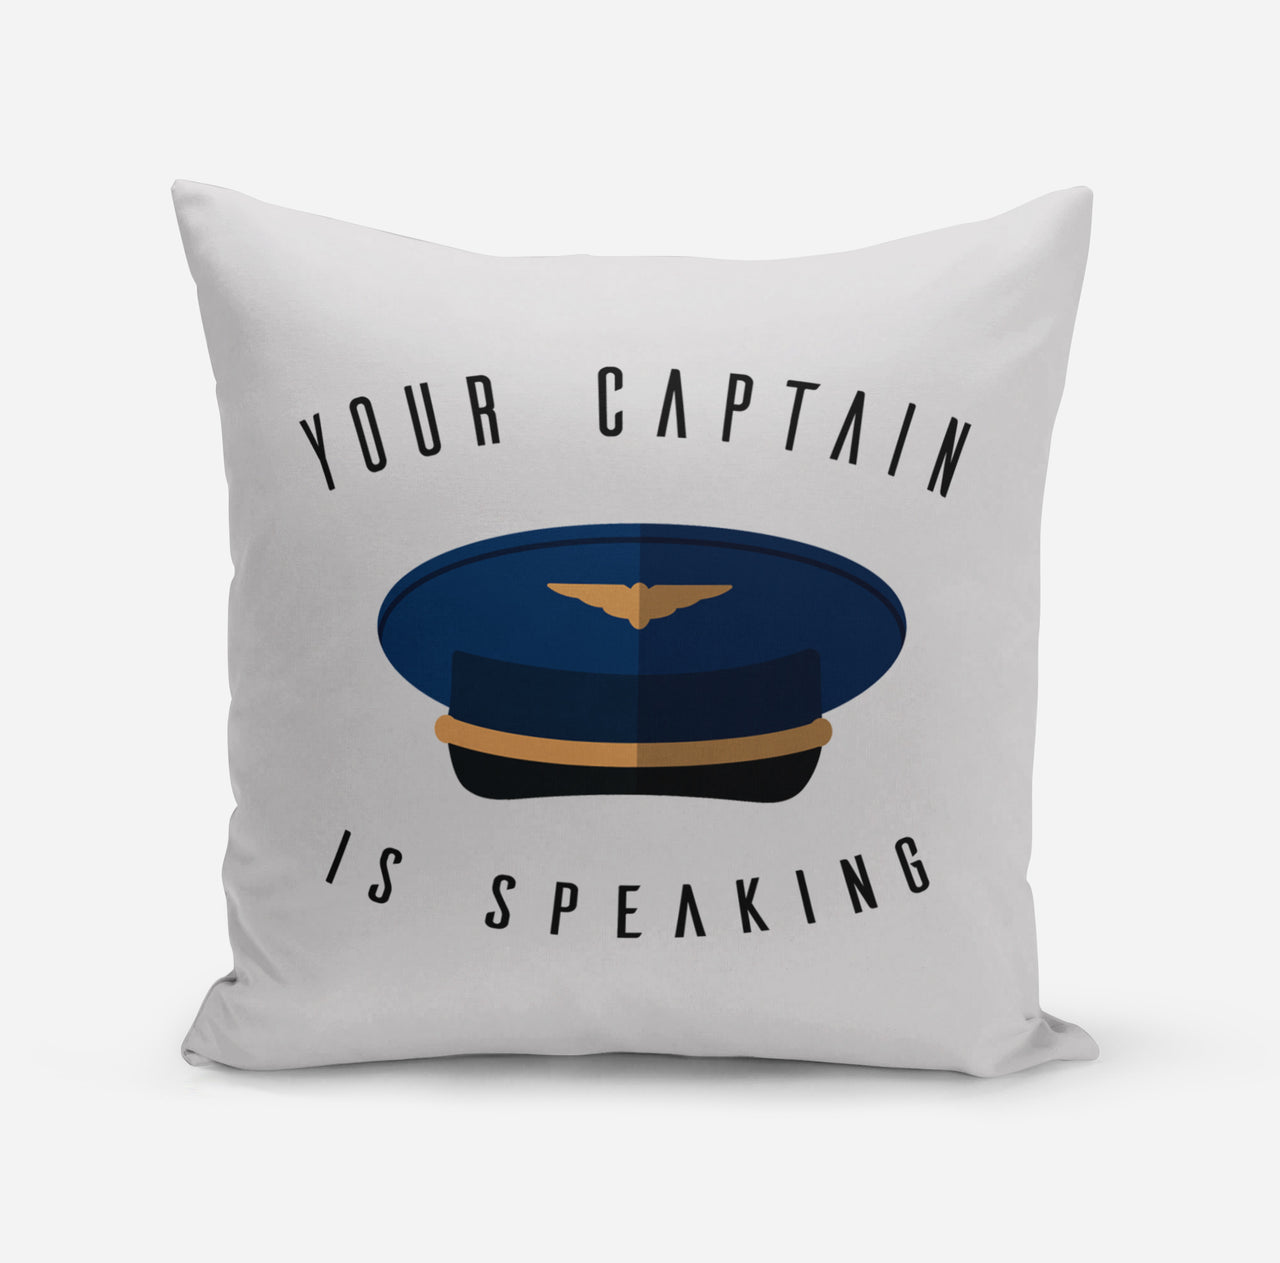 Your Captain Is Speaking Designed Pillows